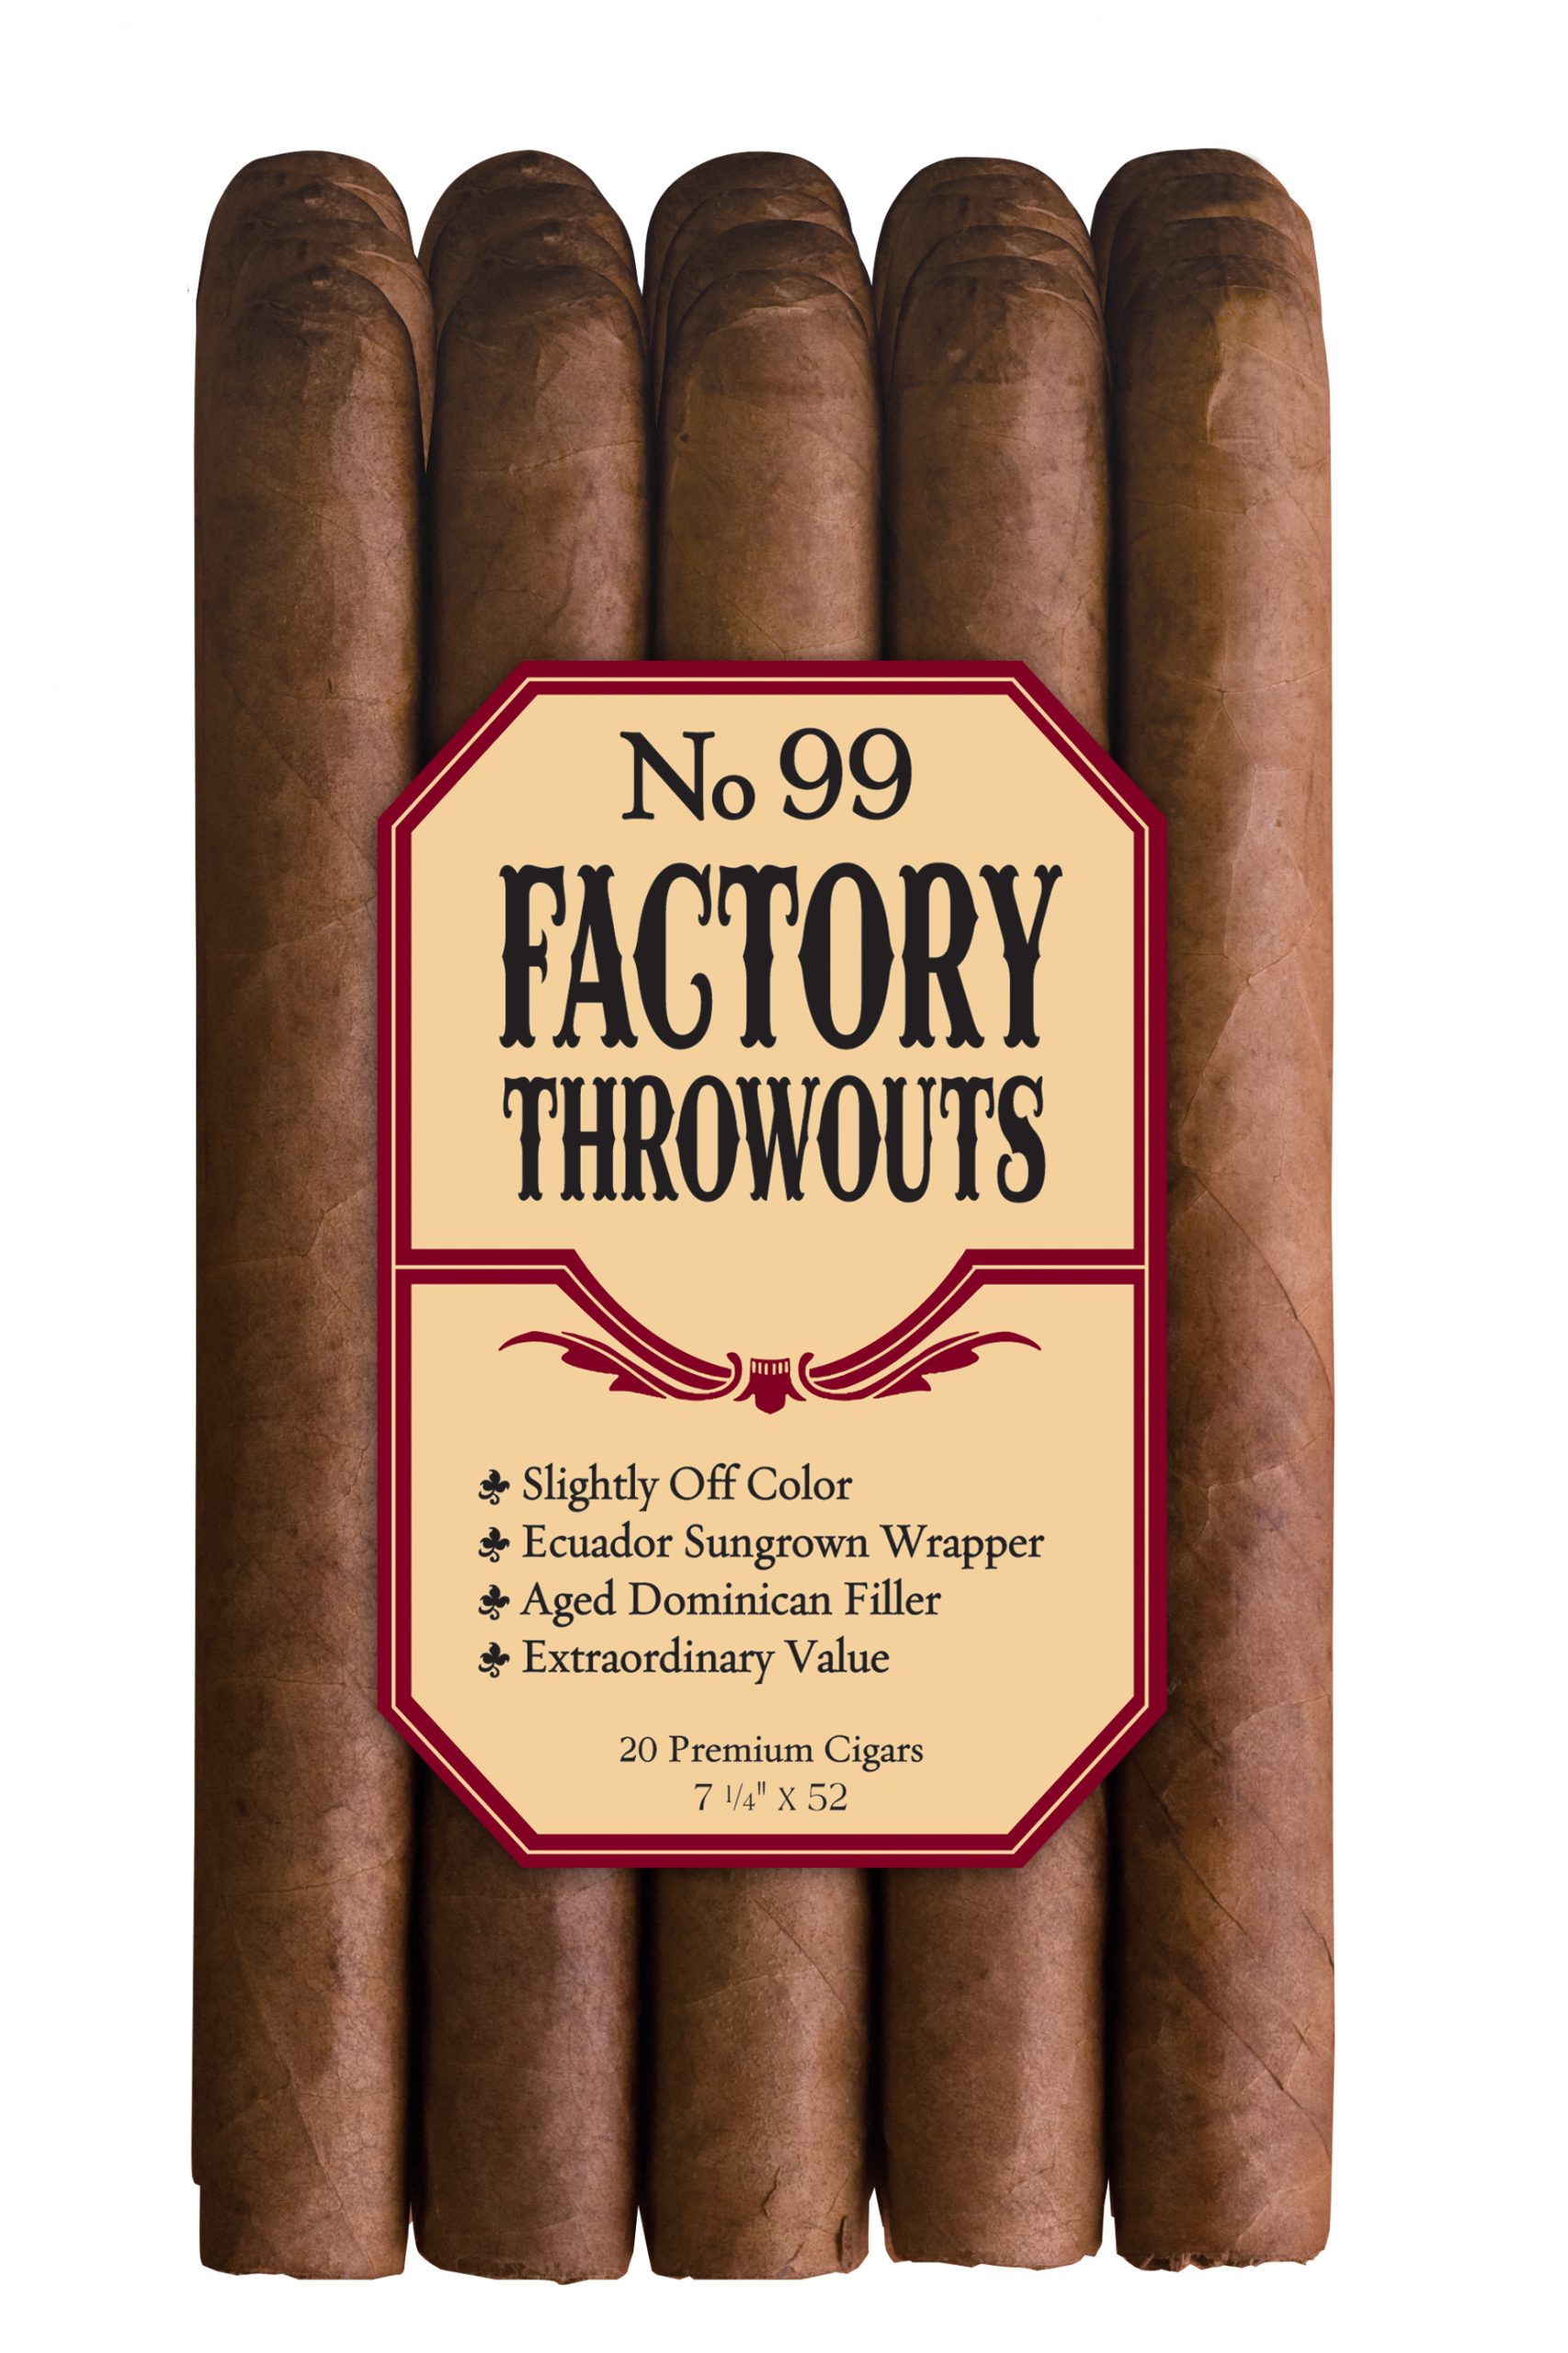 No. 99 Factory Throwouts Cigars